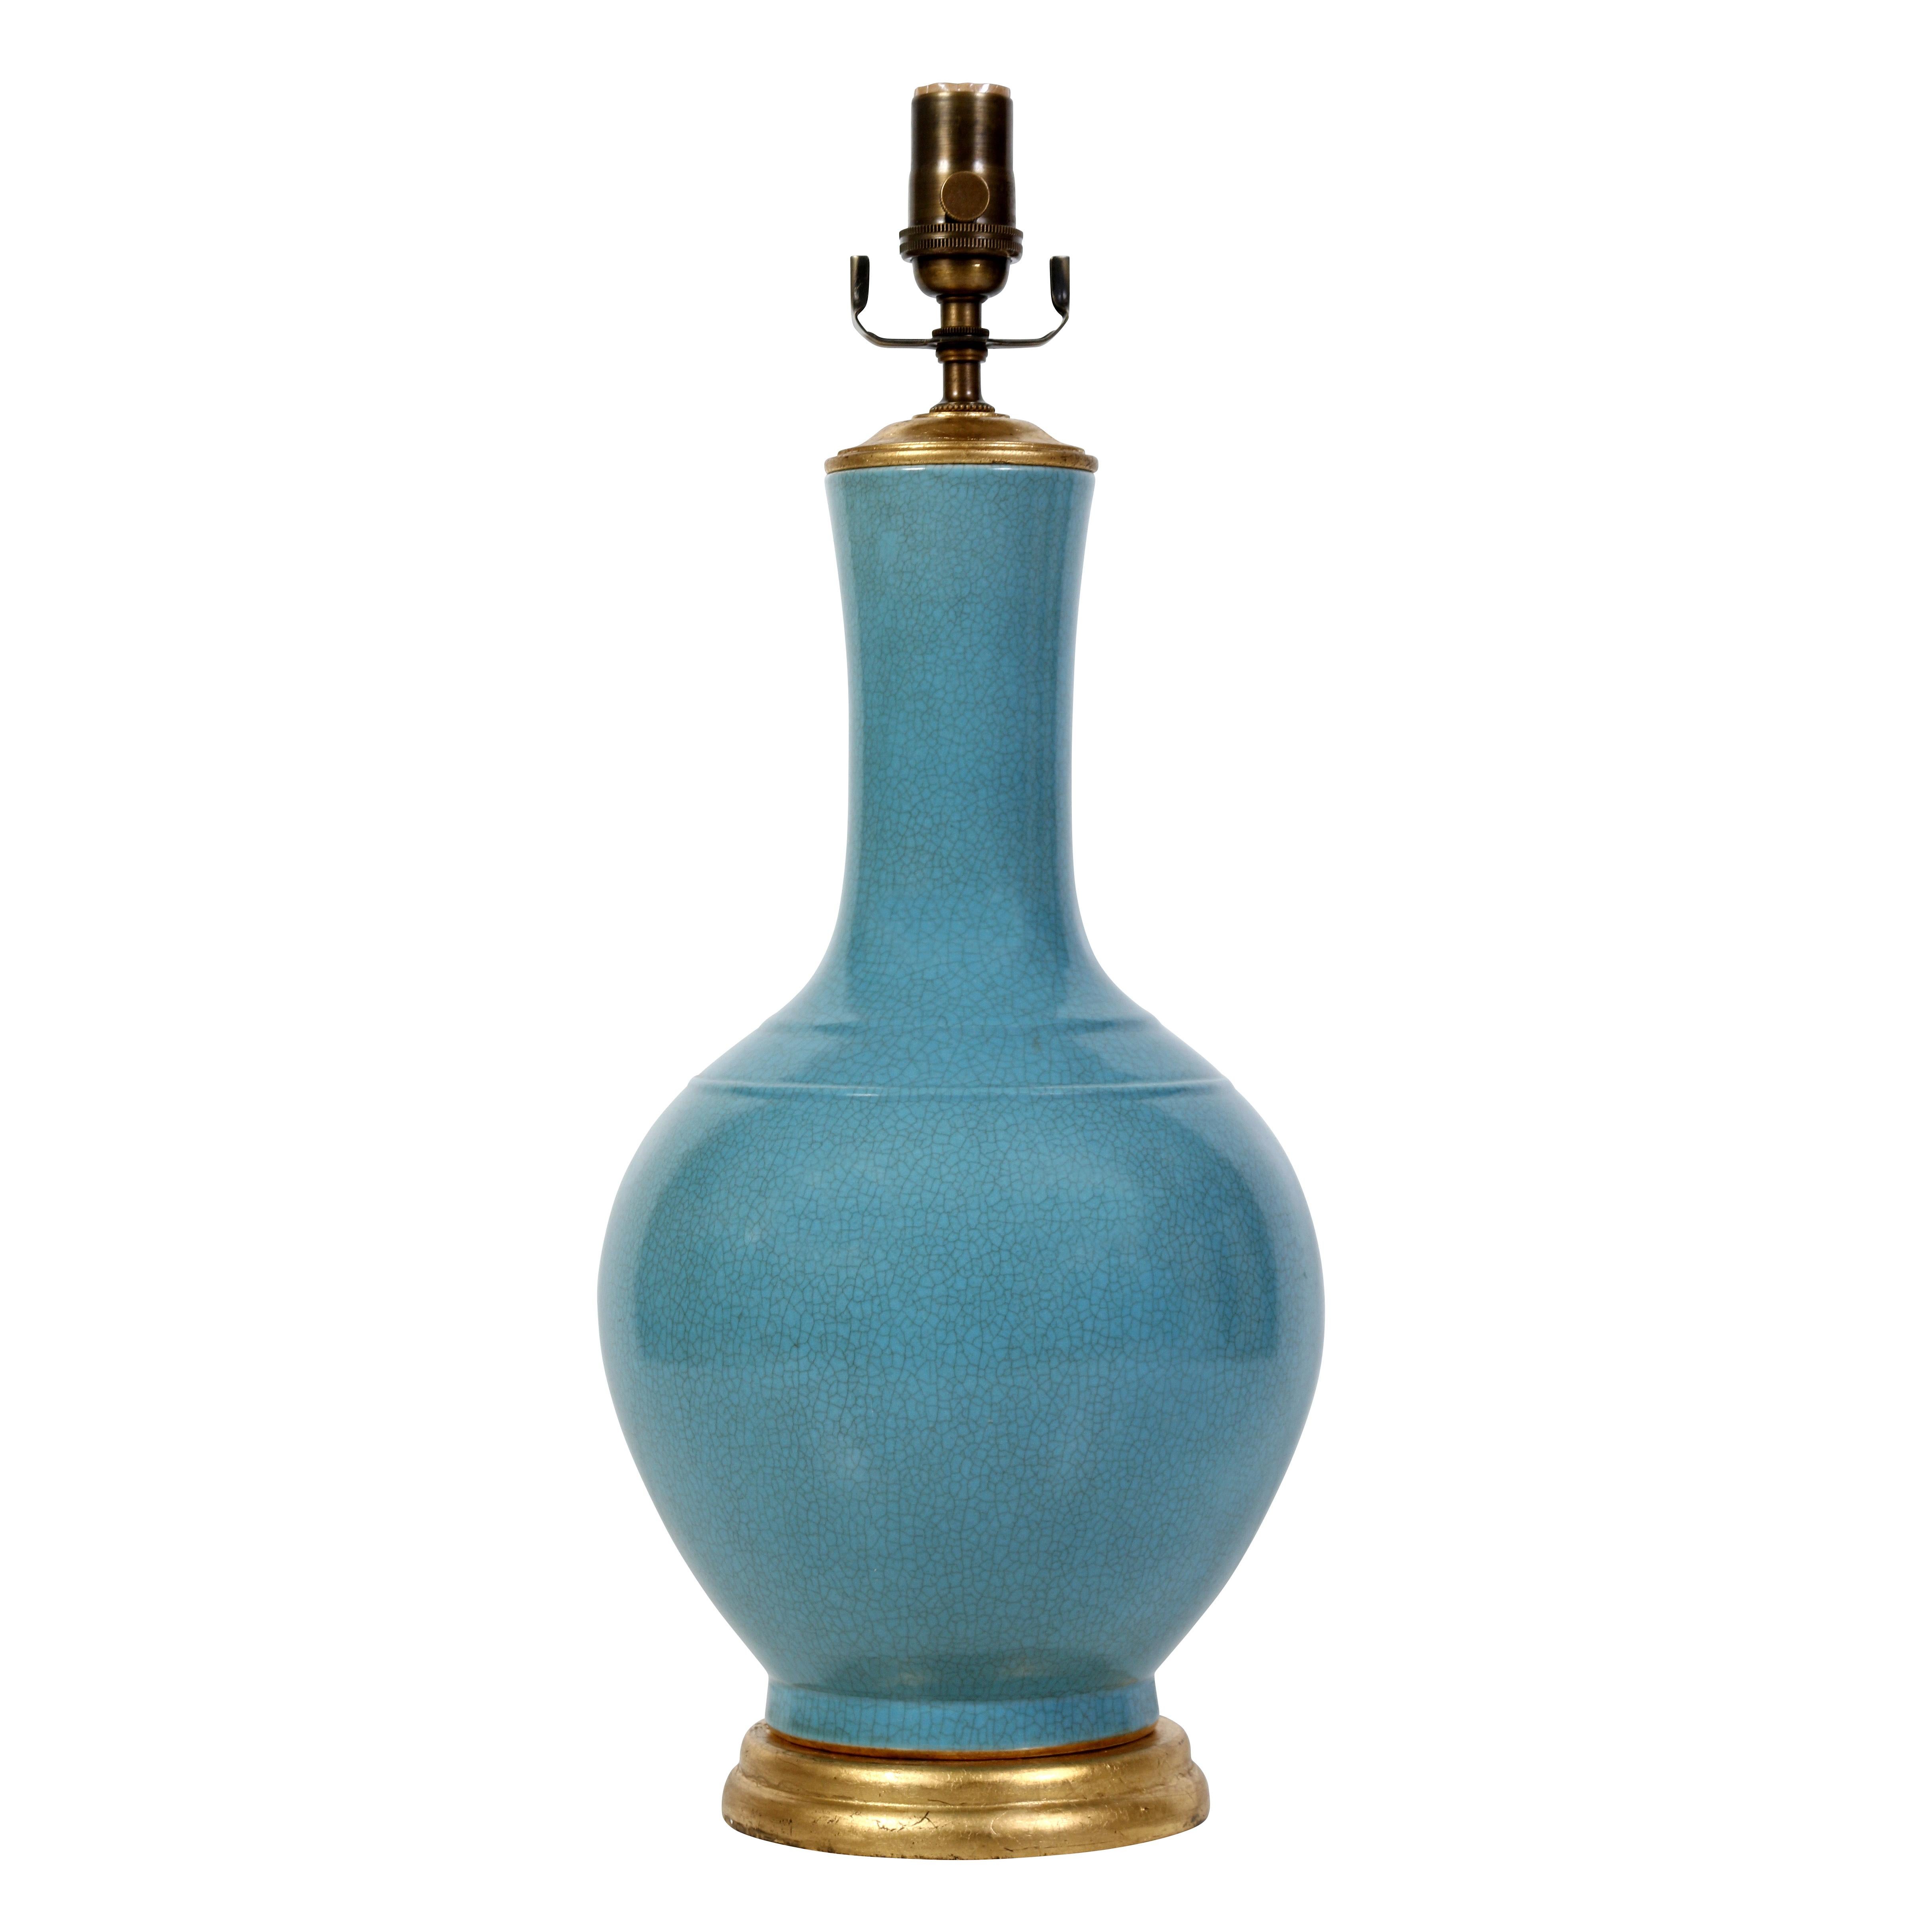 A pair of Chinese export lamps in a stunning robins's egg blue on a gilt base. The finish has a subtle crackle detail, adding a bit of depth. The urn-shaped lamps are in a medium scale, making them quite versatile--they would work on bedside tables,